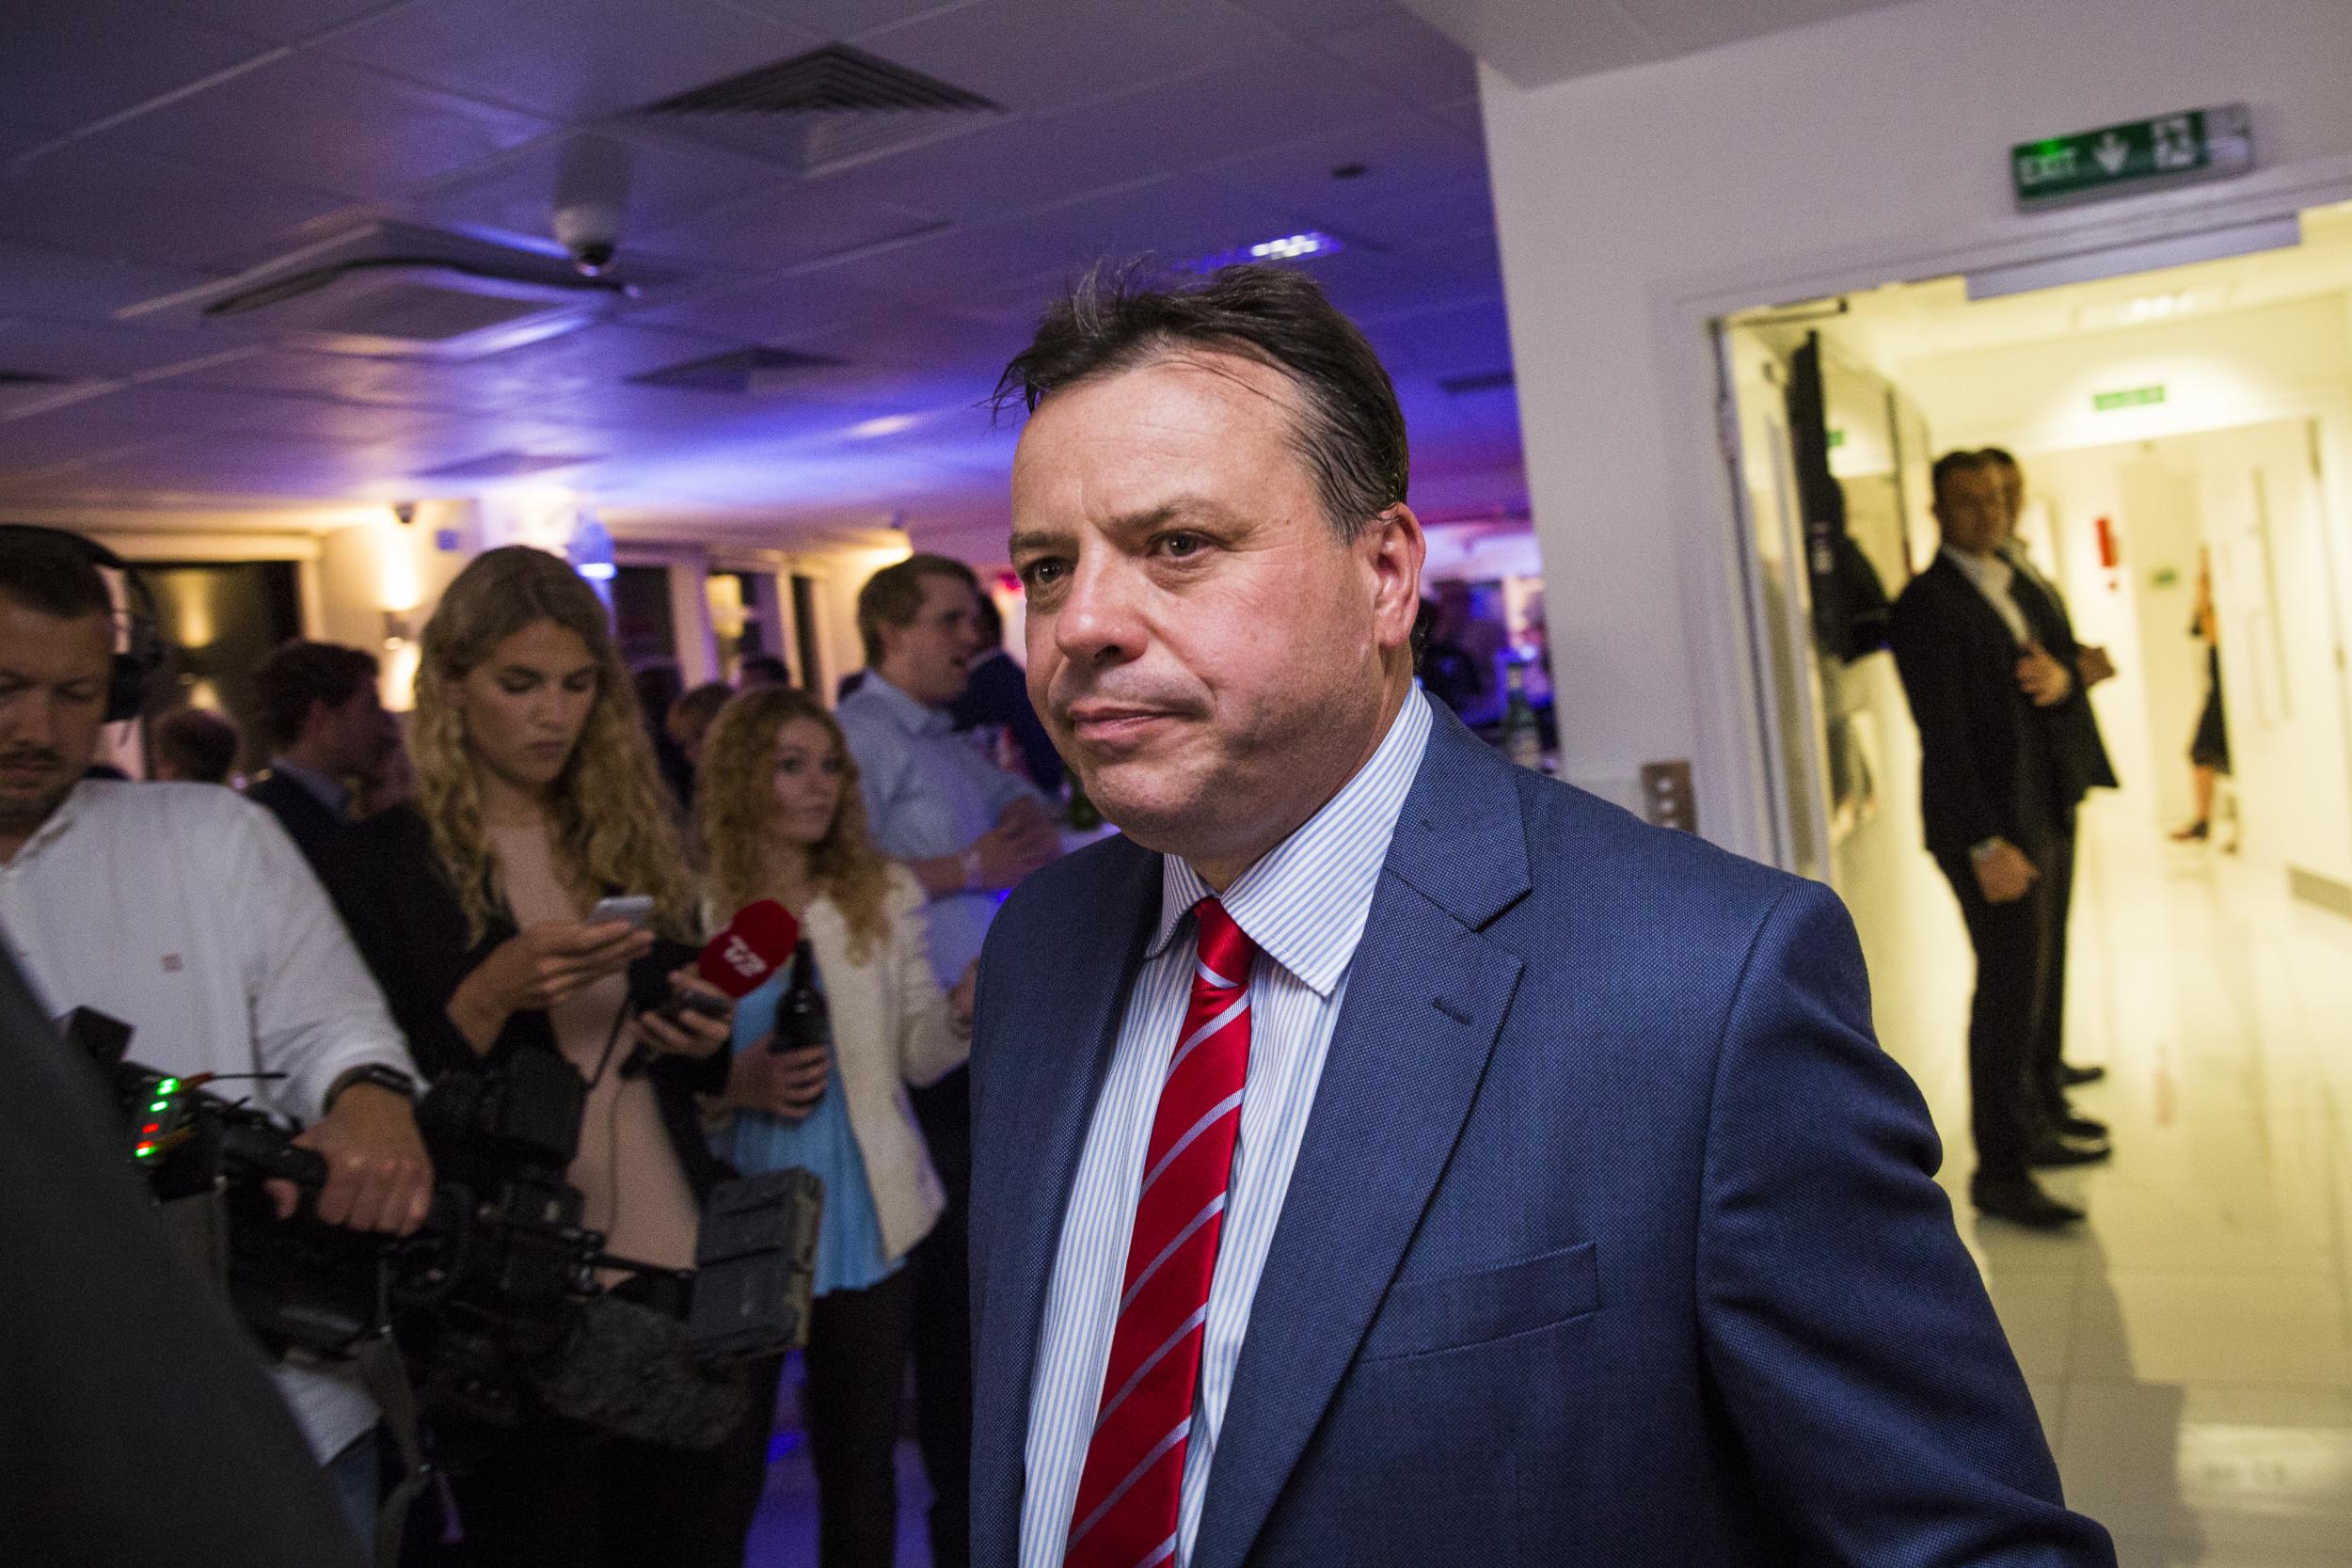 Arron Banks' Leave.EU group contributed to a 'polarising' atmosphere